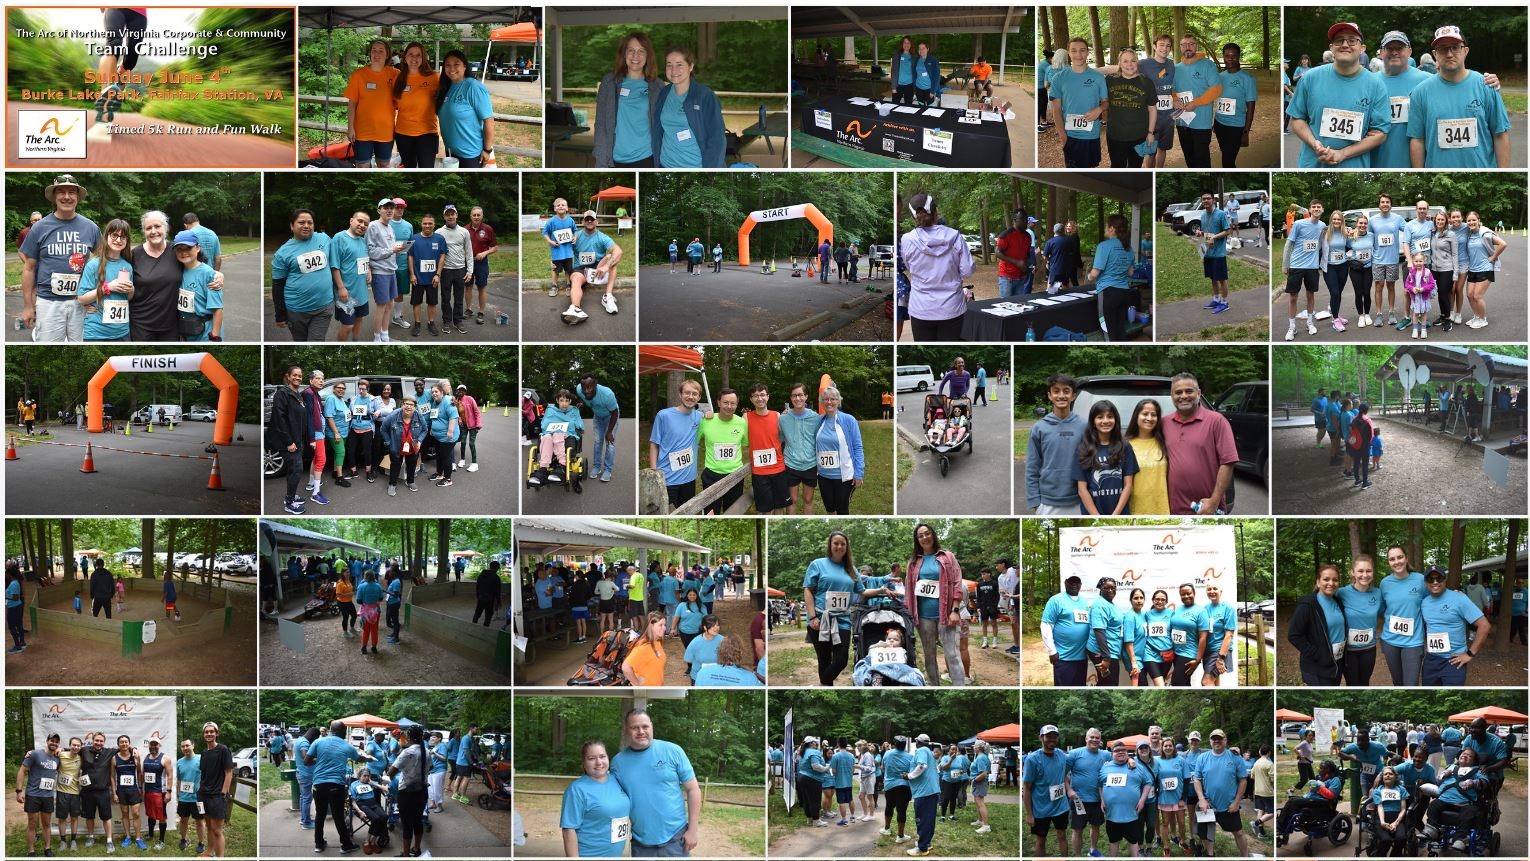 Photo collage of images from the Team Challenge 5k race event